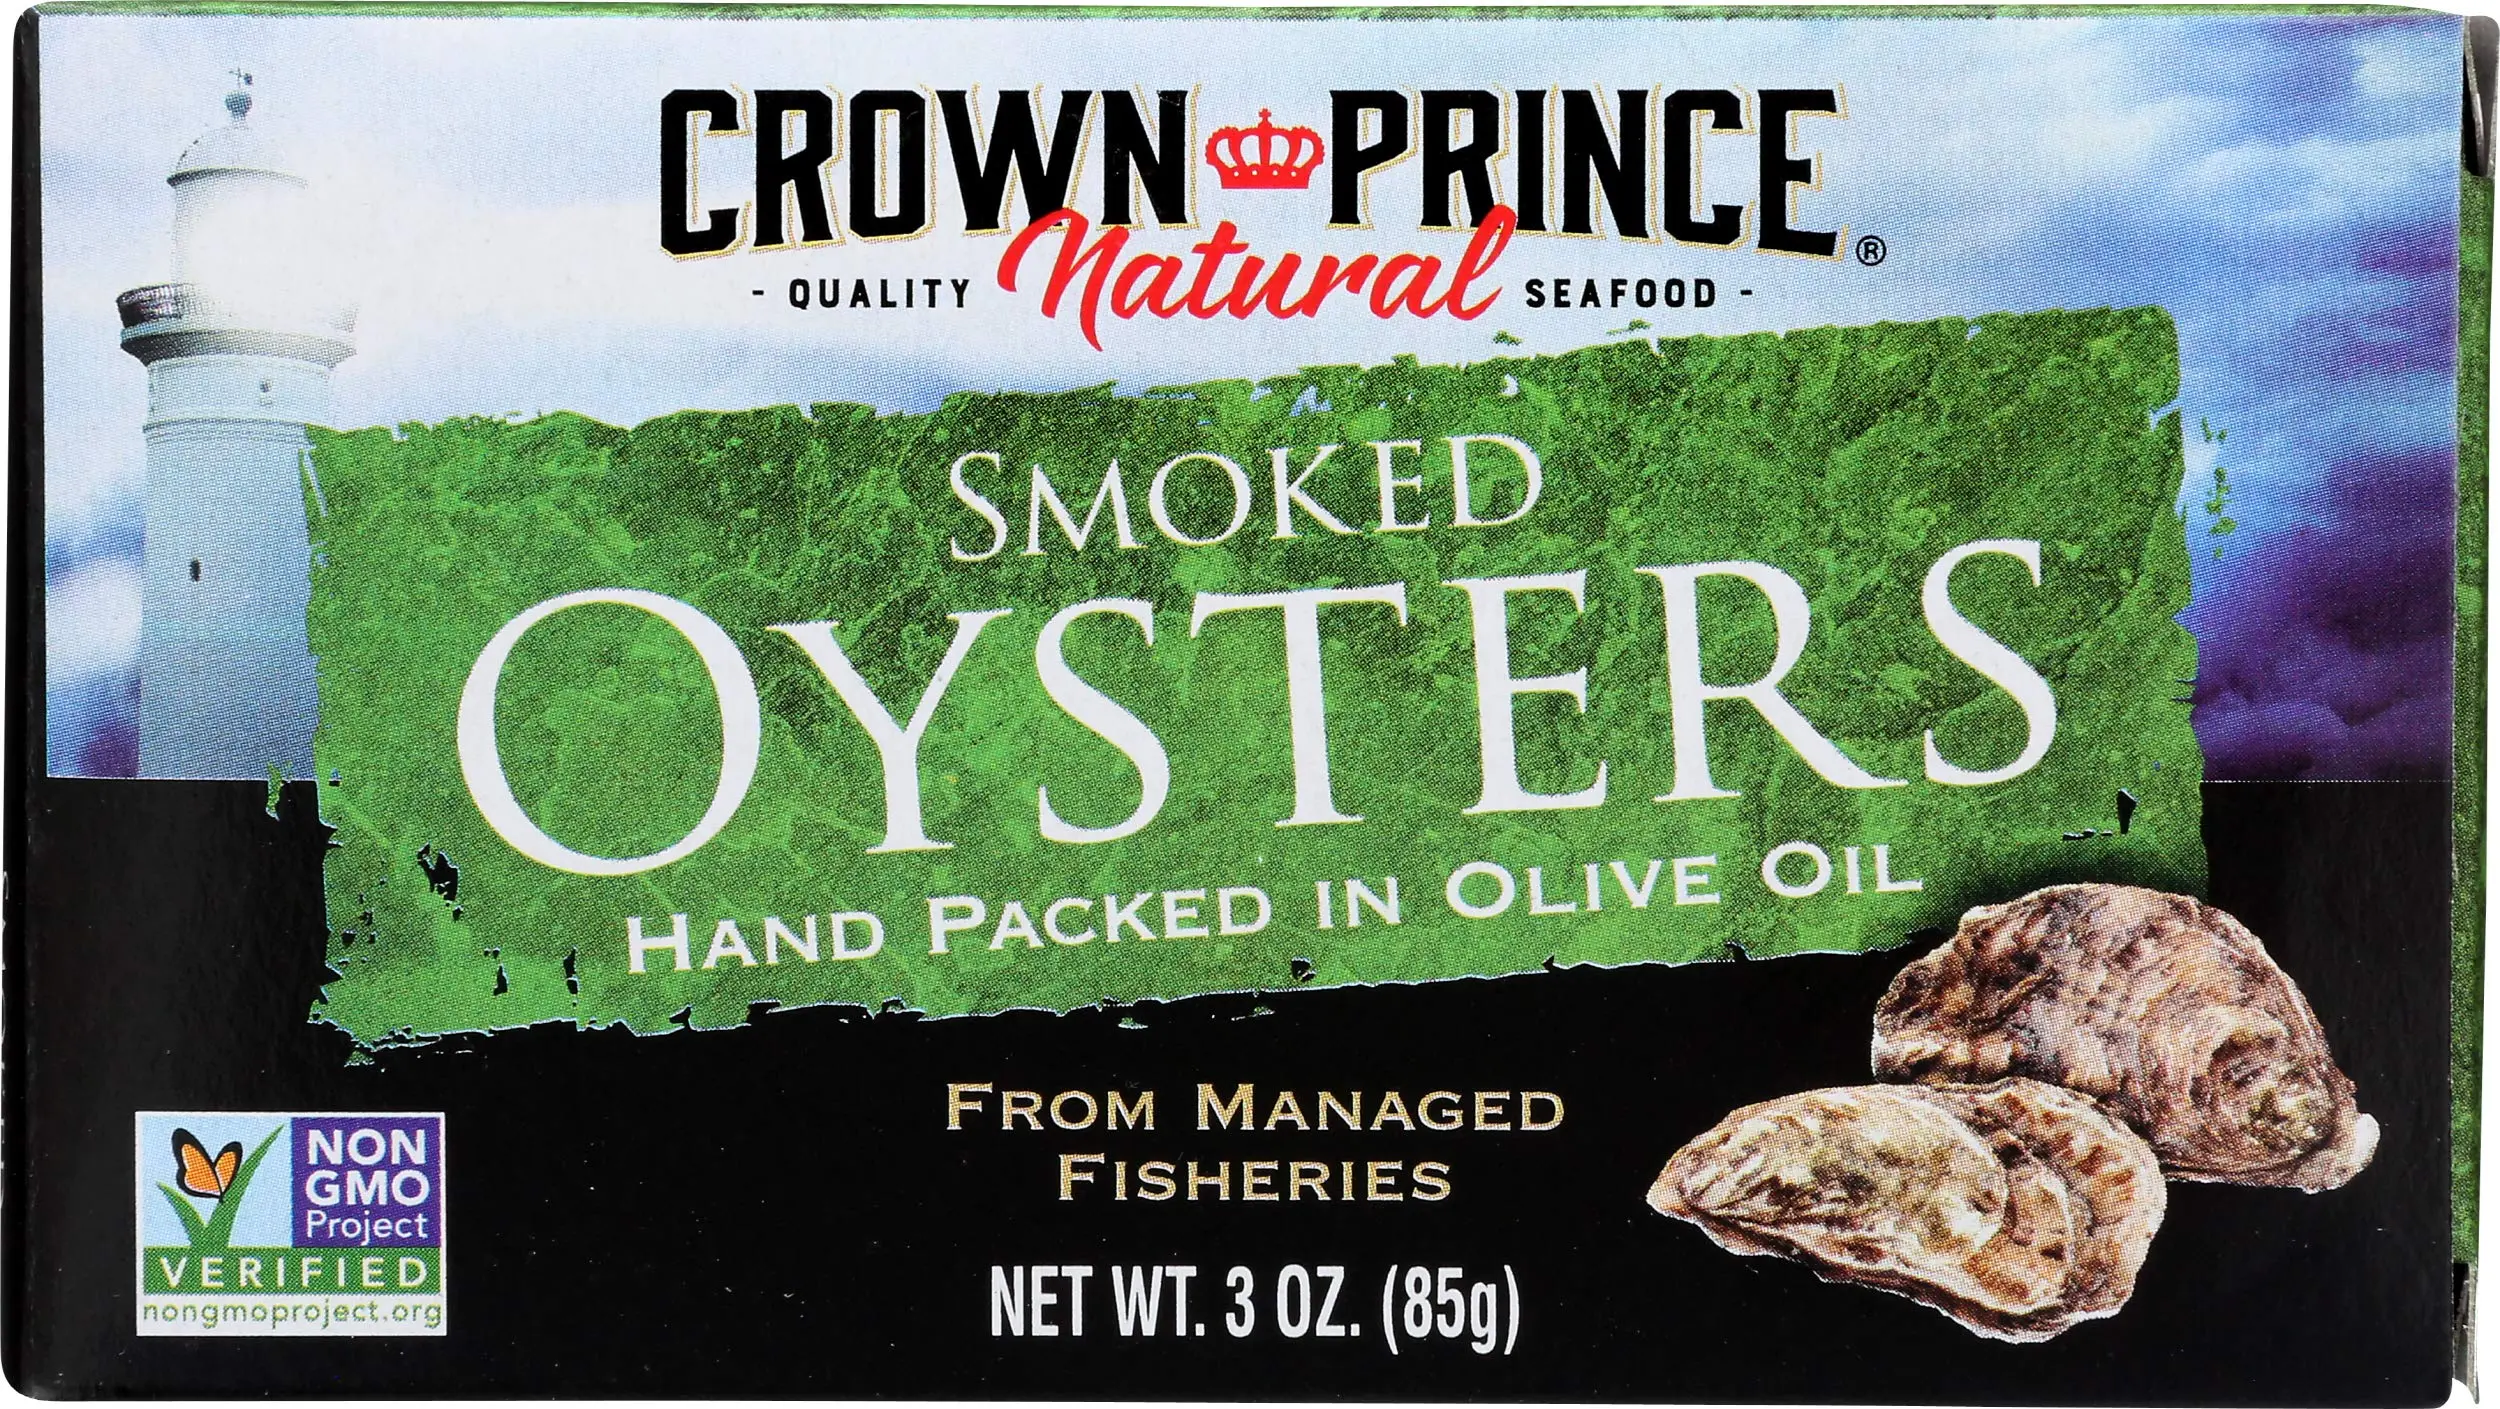 crown prince smoked oysters - Are Crown Prince smoked oysters healthy